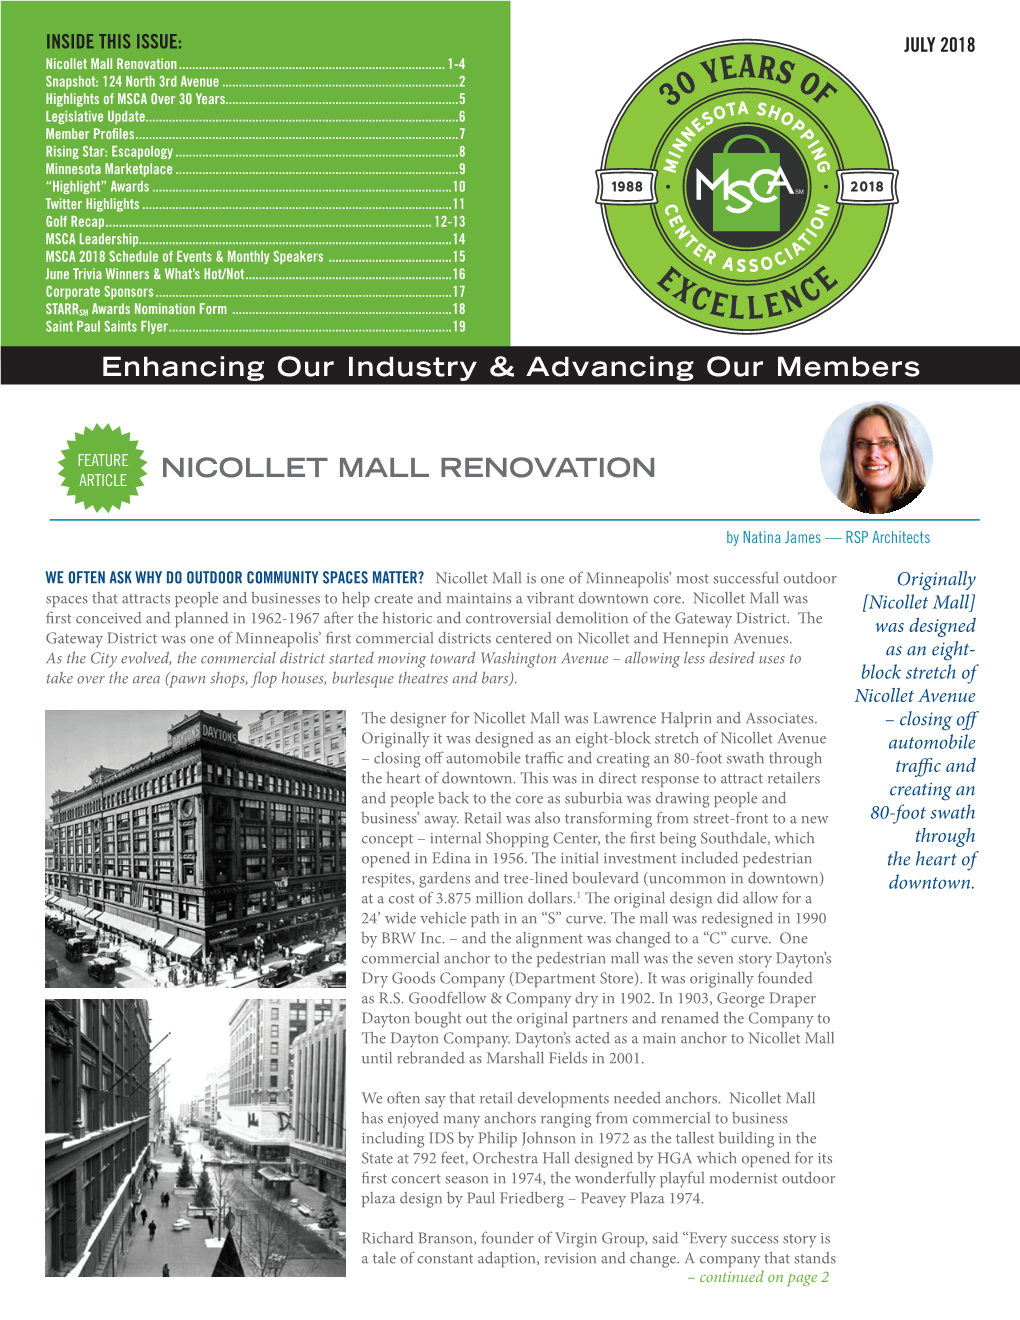 NICOLLET MALL RENOVATION Enhancing Our Industry